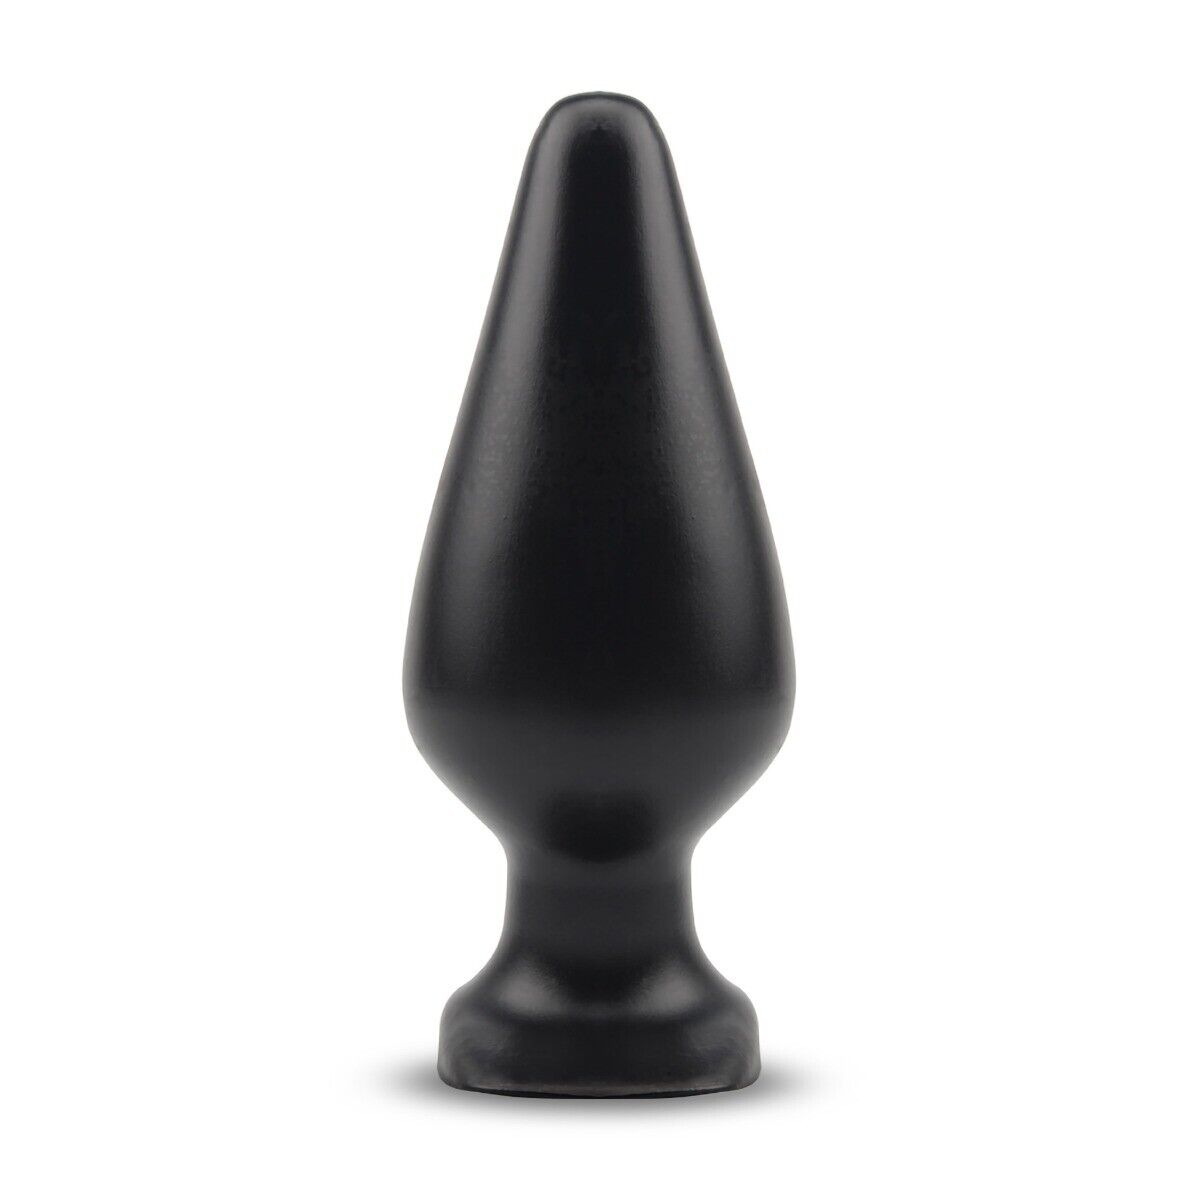 Soft Smooth Flexible 5" Black Anal Butt Plug Anal Play Training Sex Toy